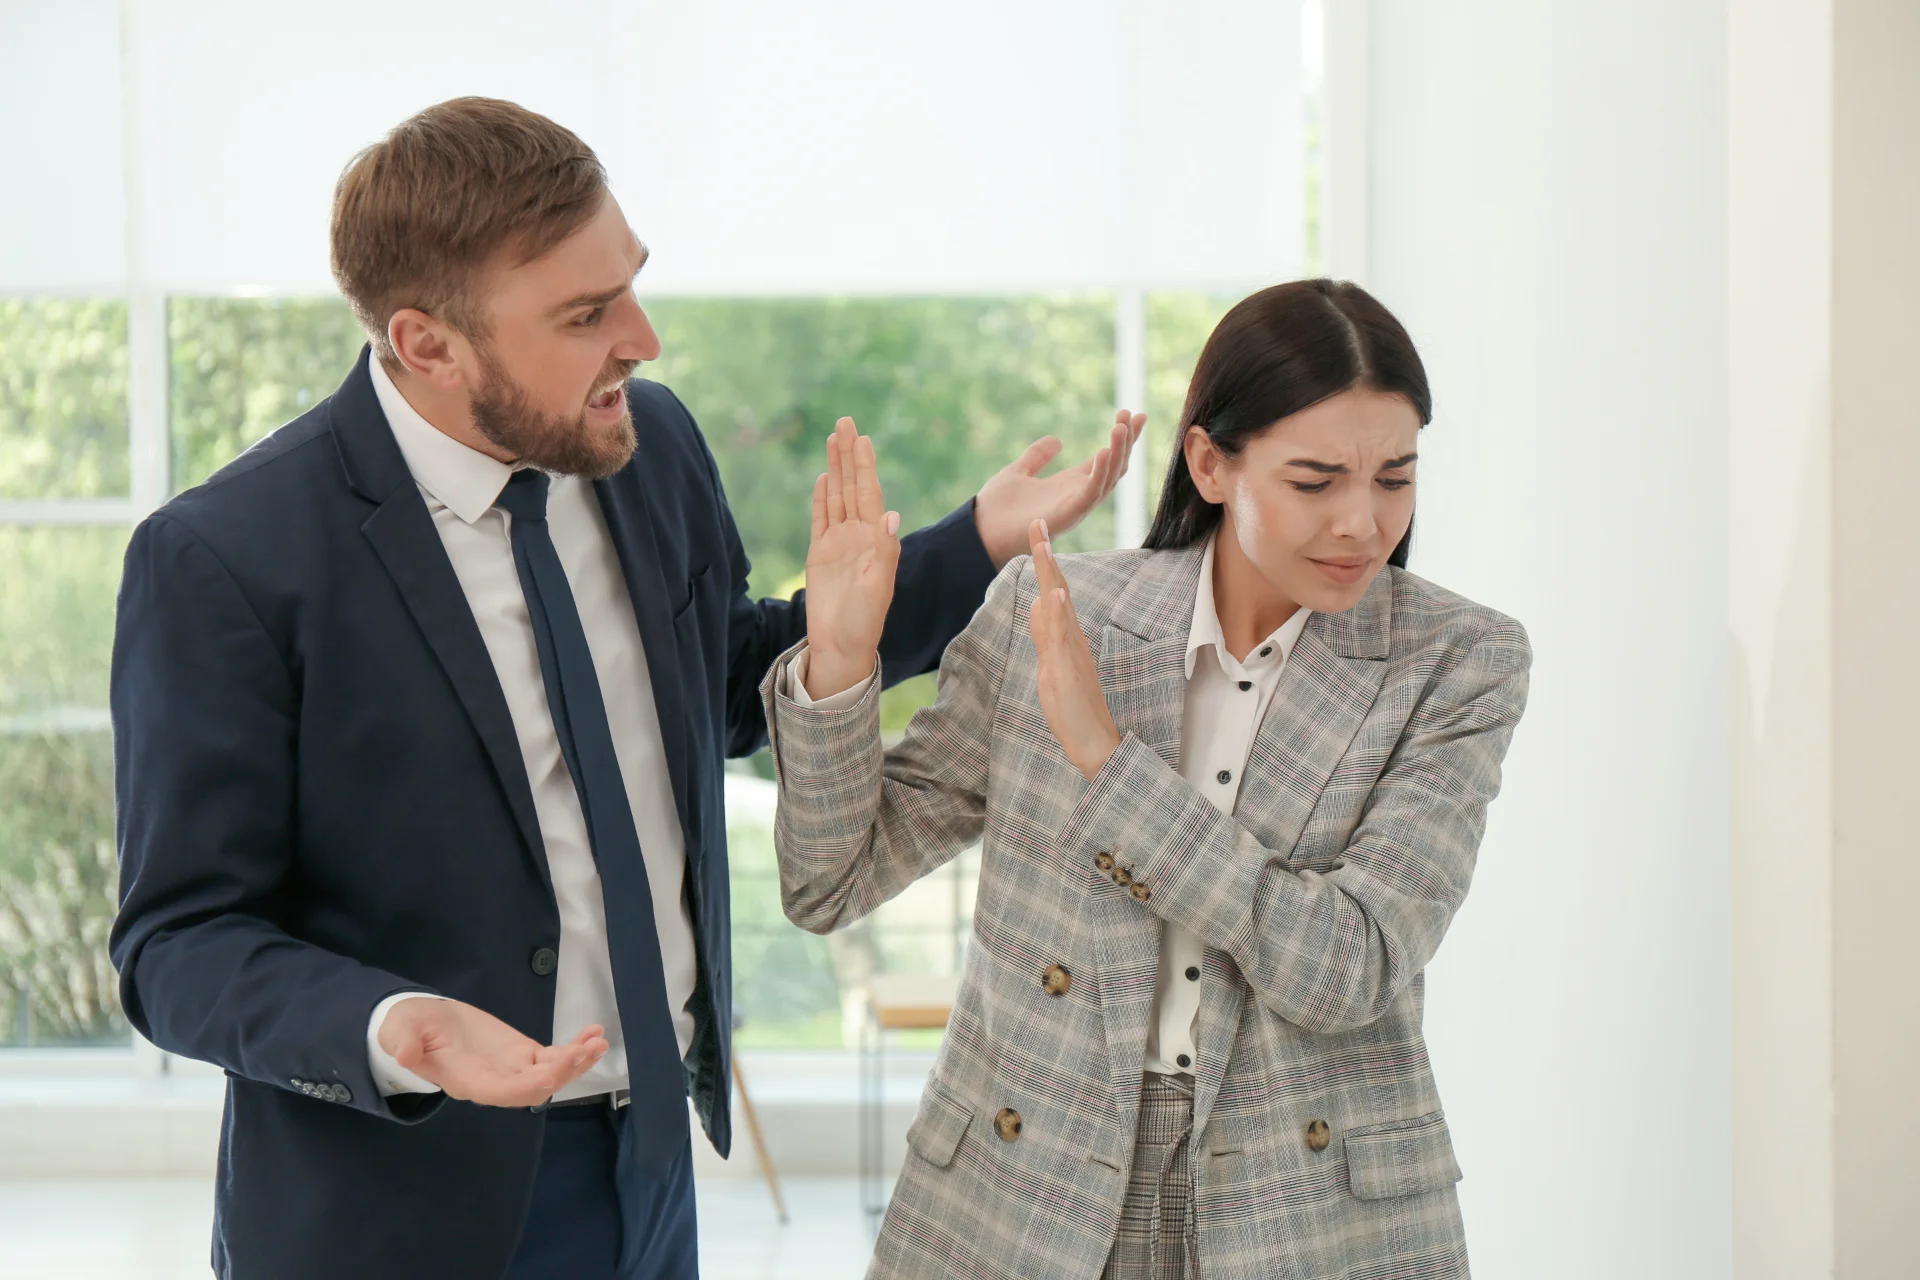 Sexism in the workplace with a man screaming at a woman